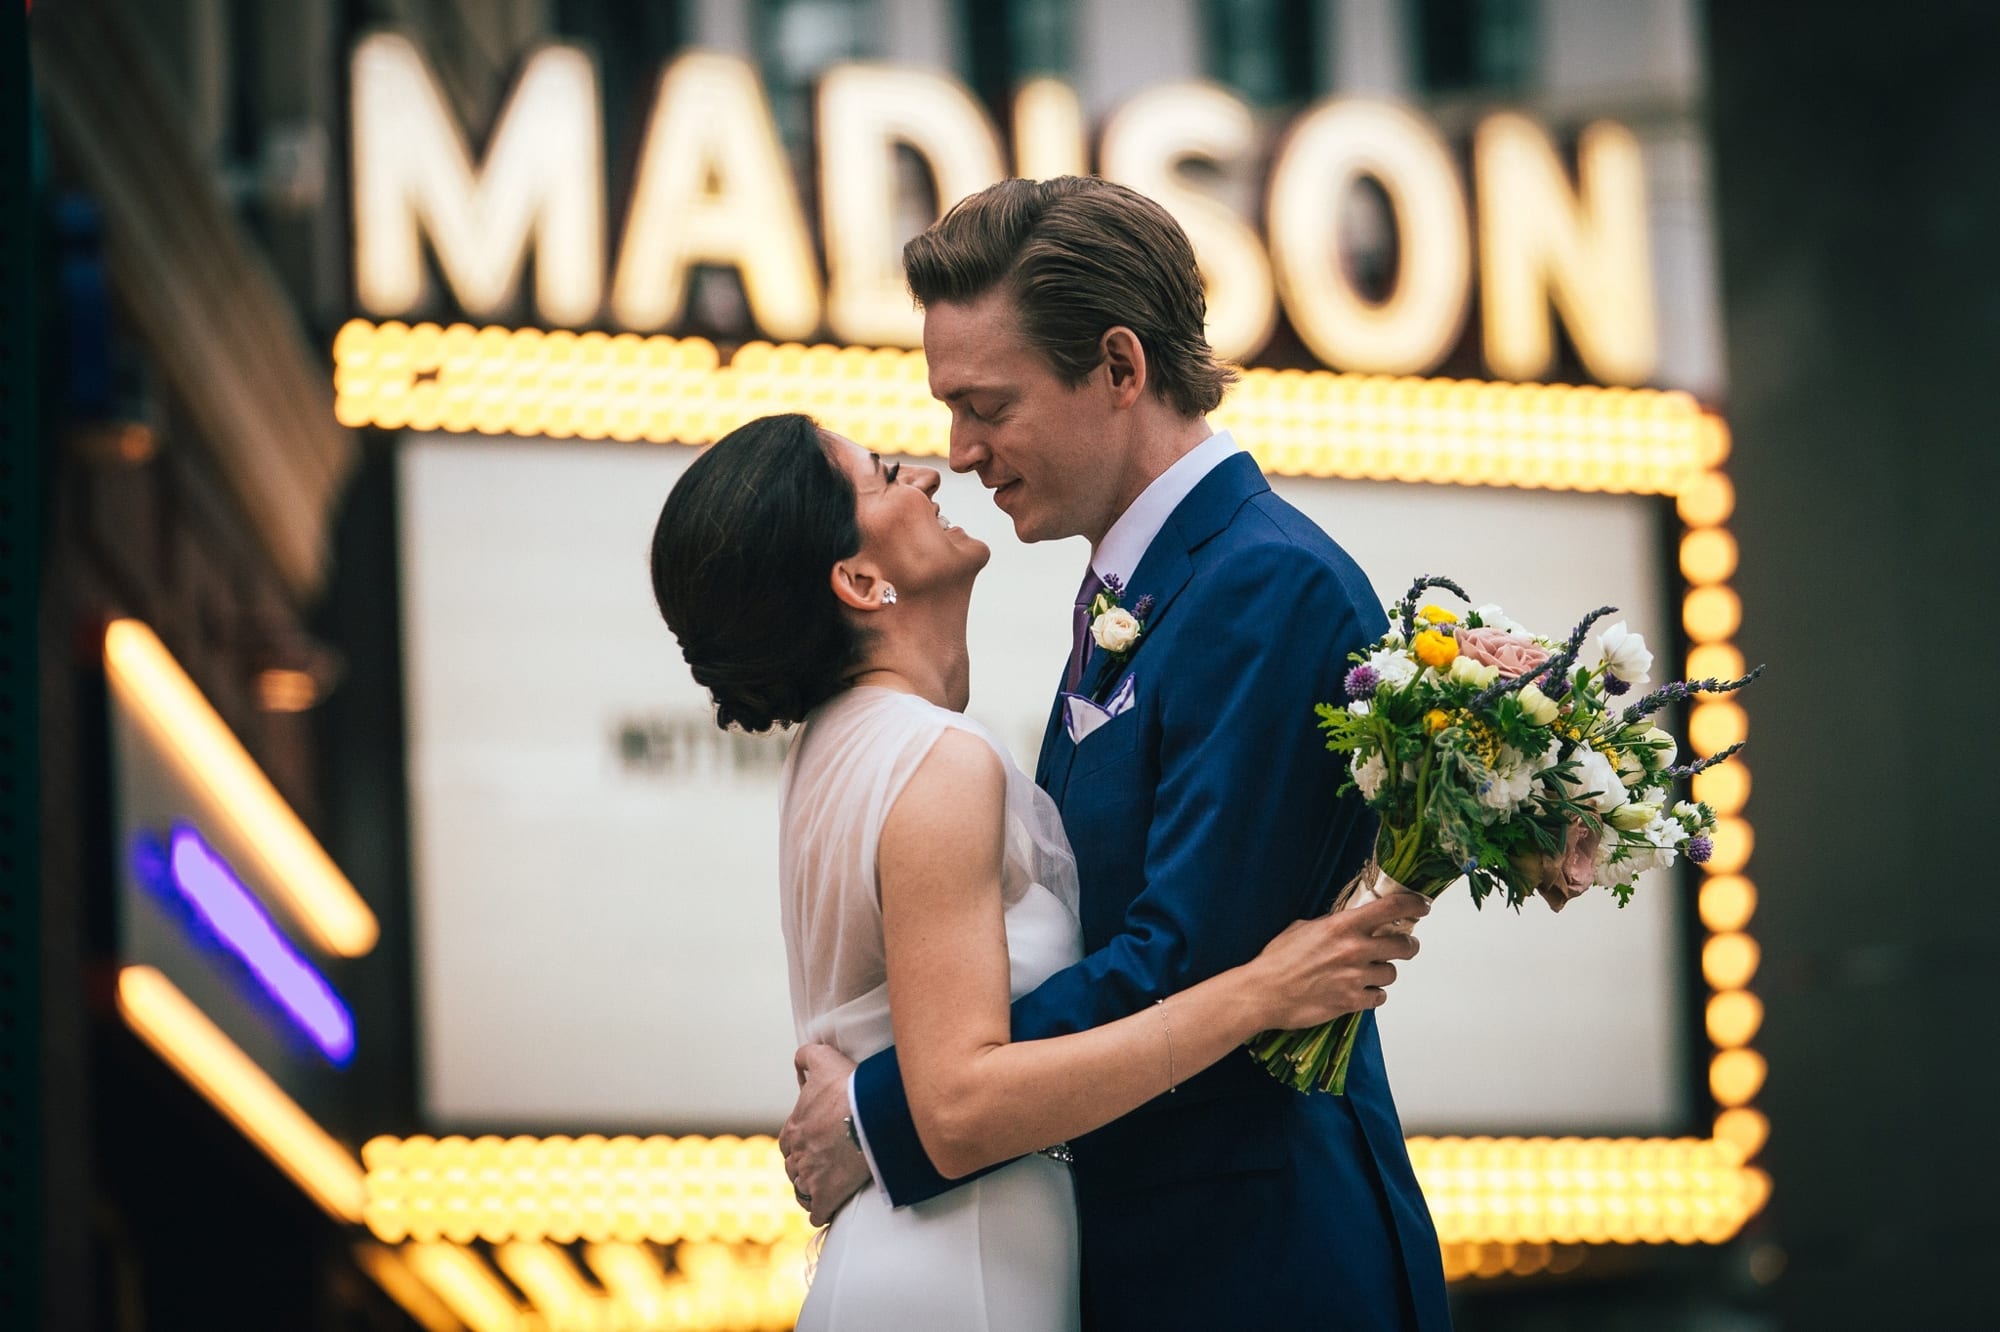 wedding photo in front of Madison Building marquee sign